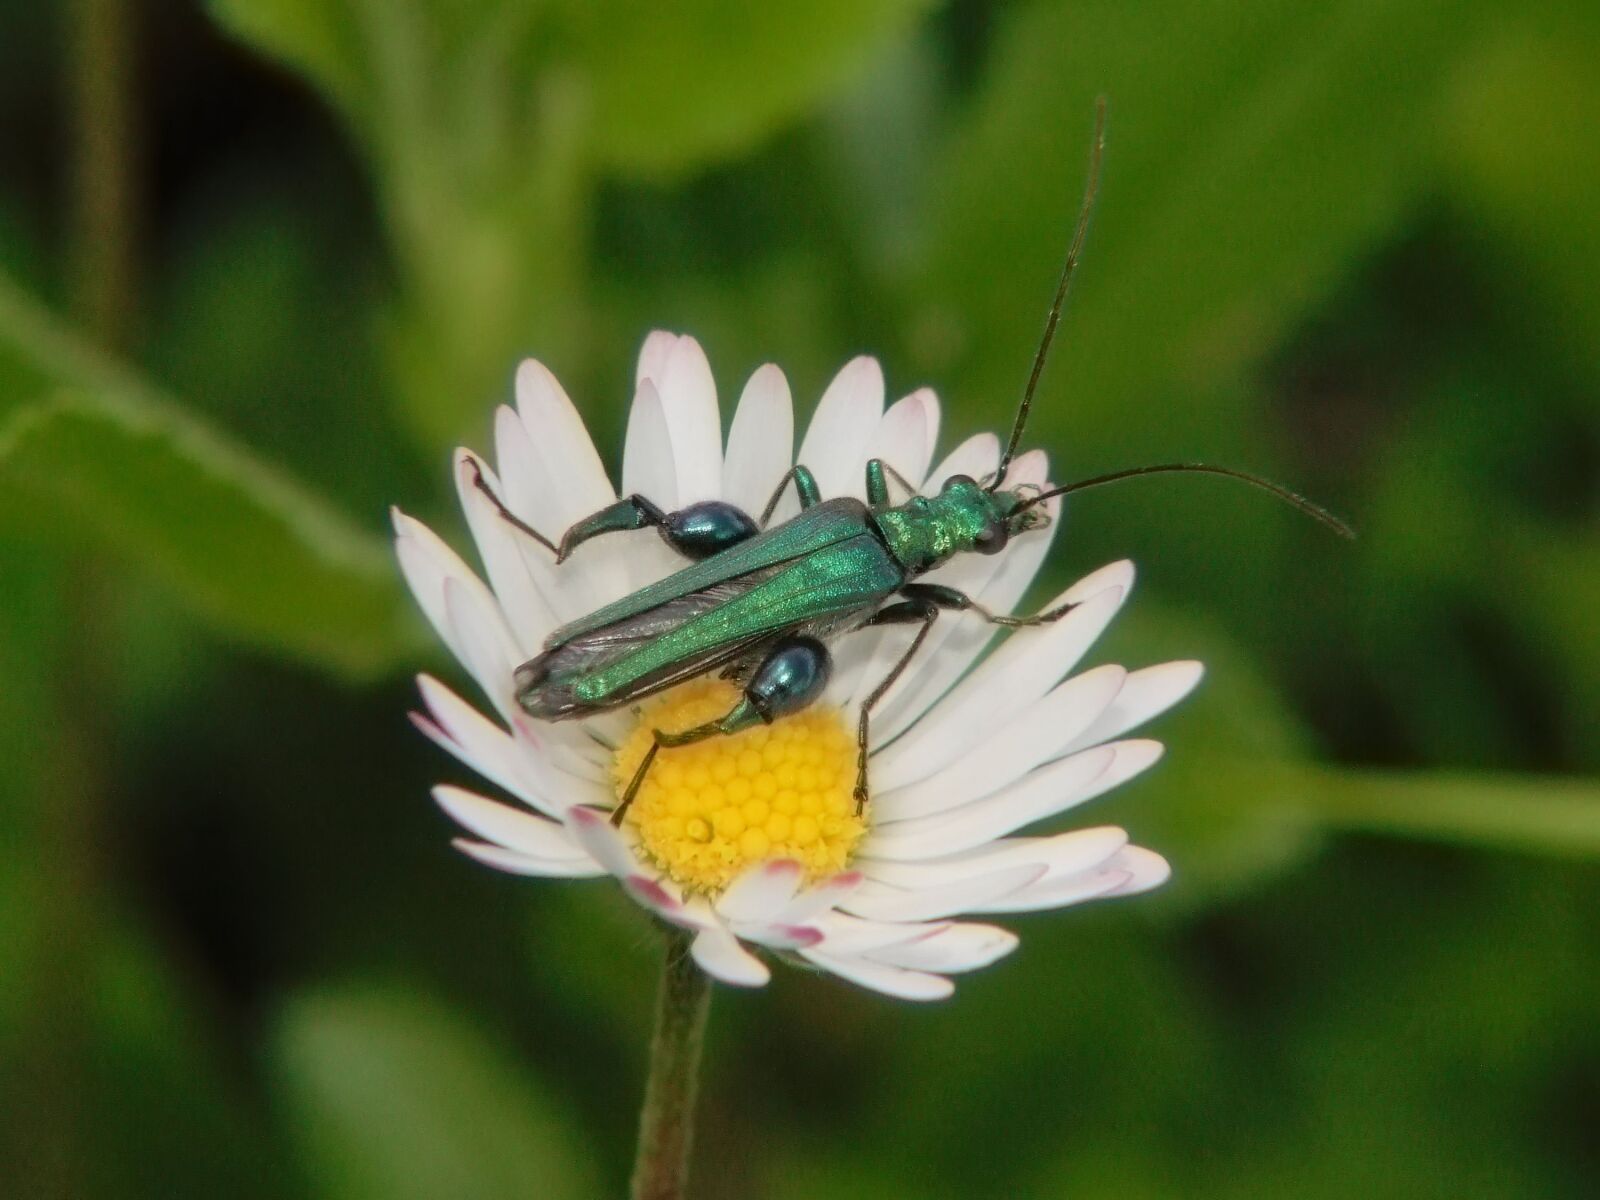 Fujifilm FinePix S6500fd sample photo. Insect, daisy, flower photography